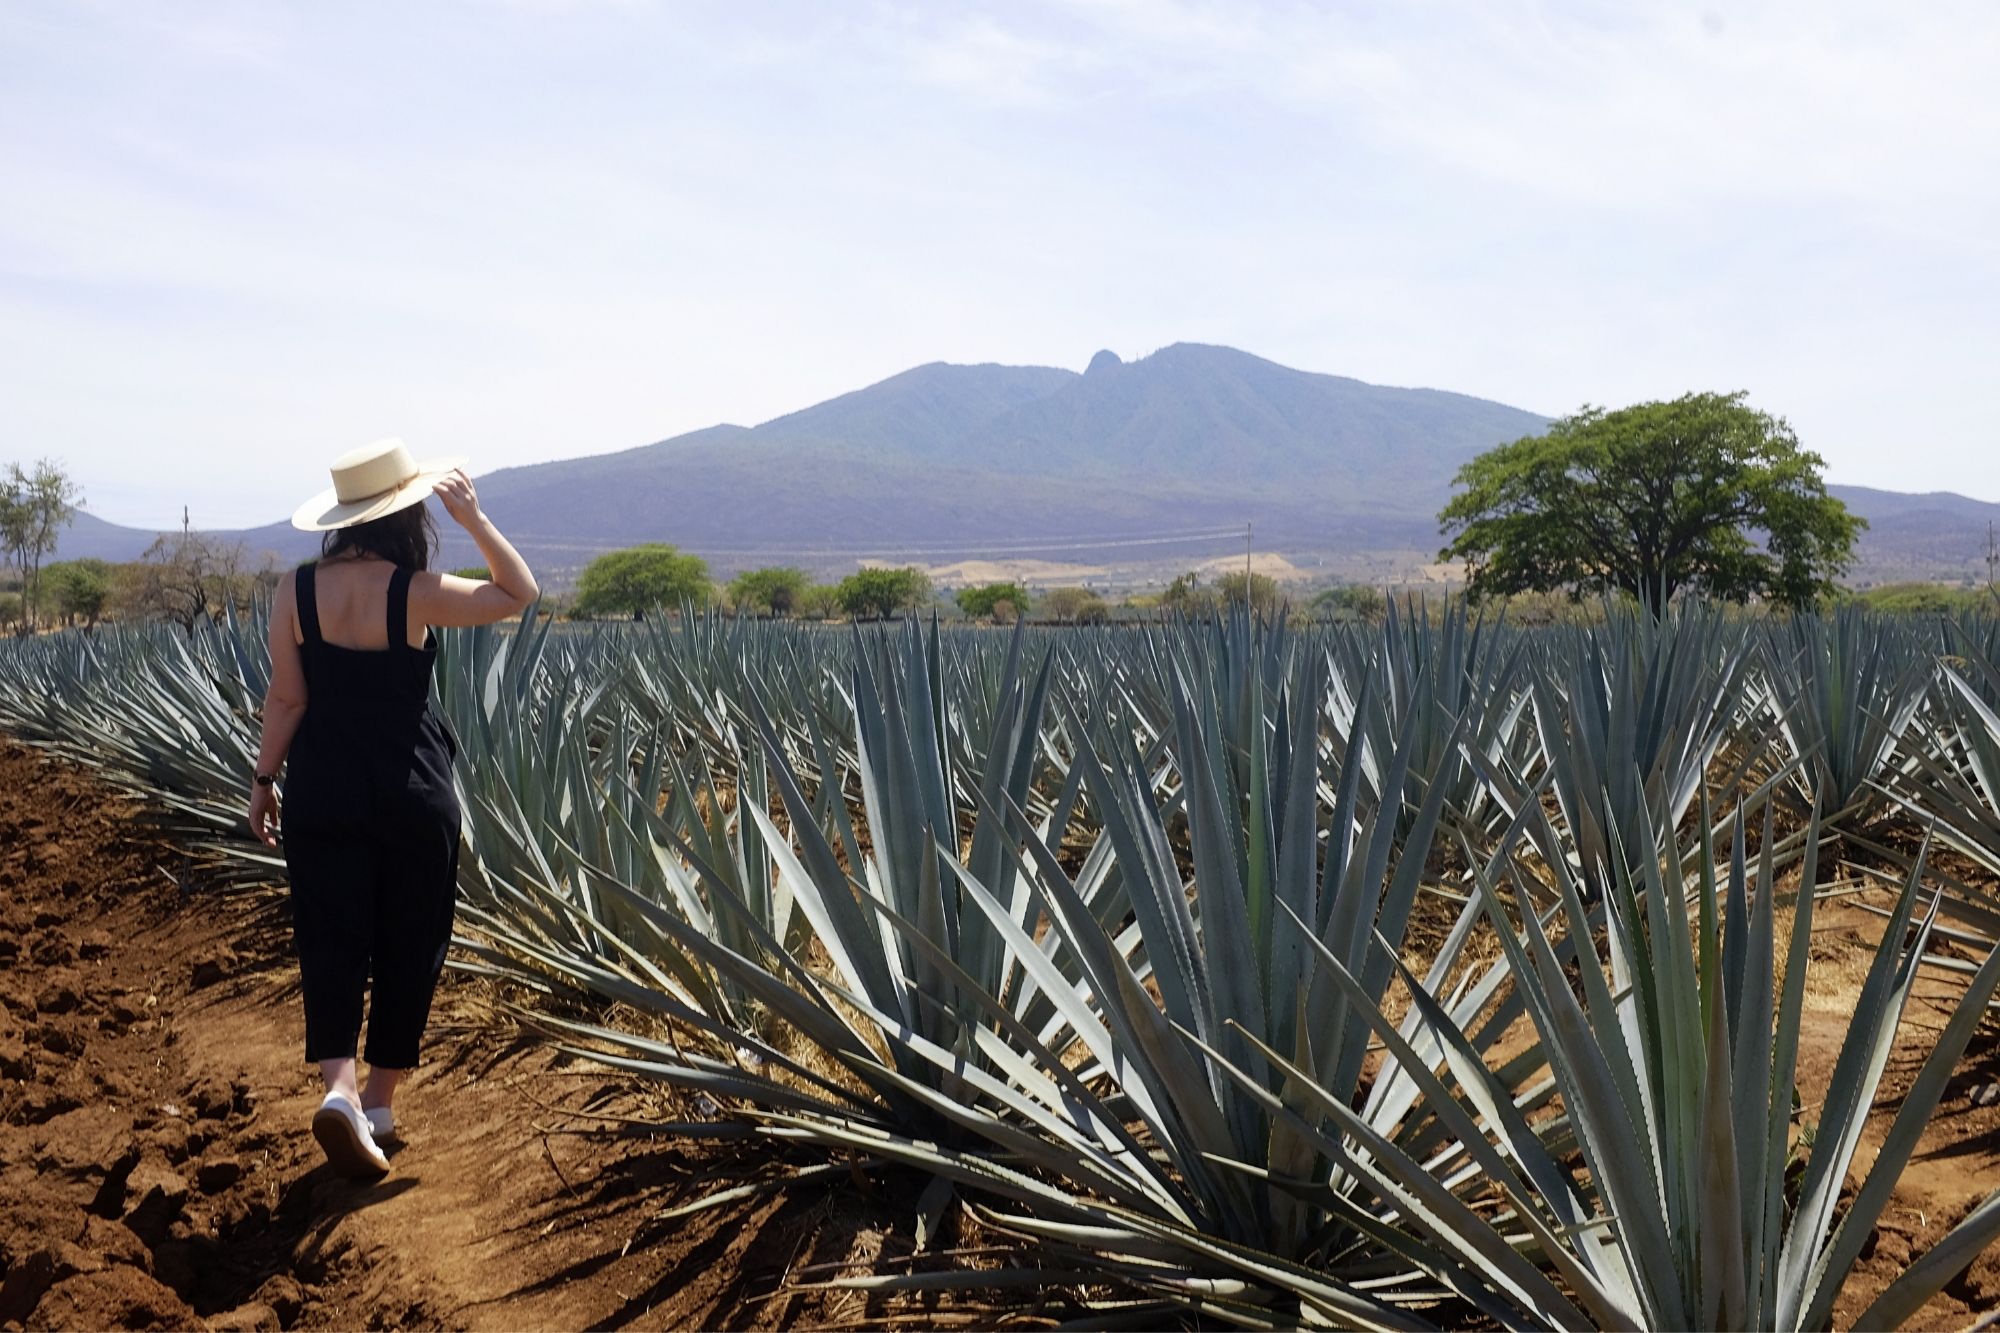 Alyssa stands in an agave field wearing a large hat